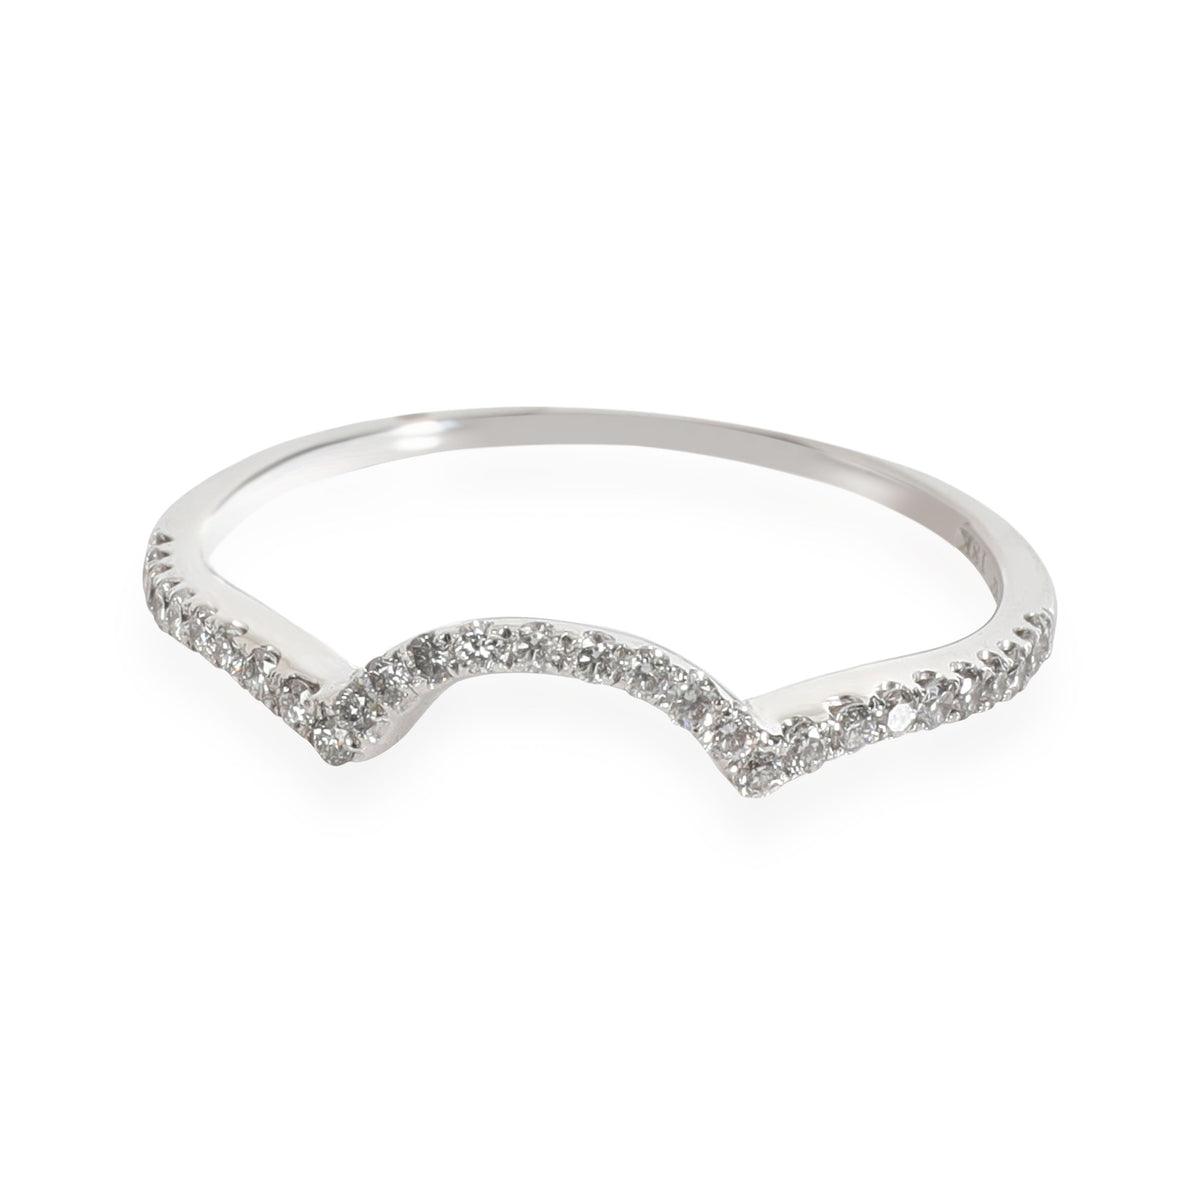 Simon G Curved Wedding Band in 18K White Gold 0.15 CTW